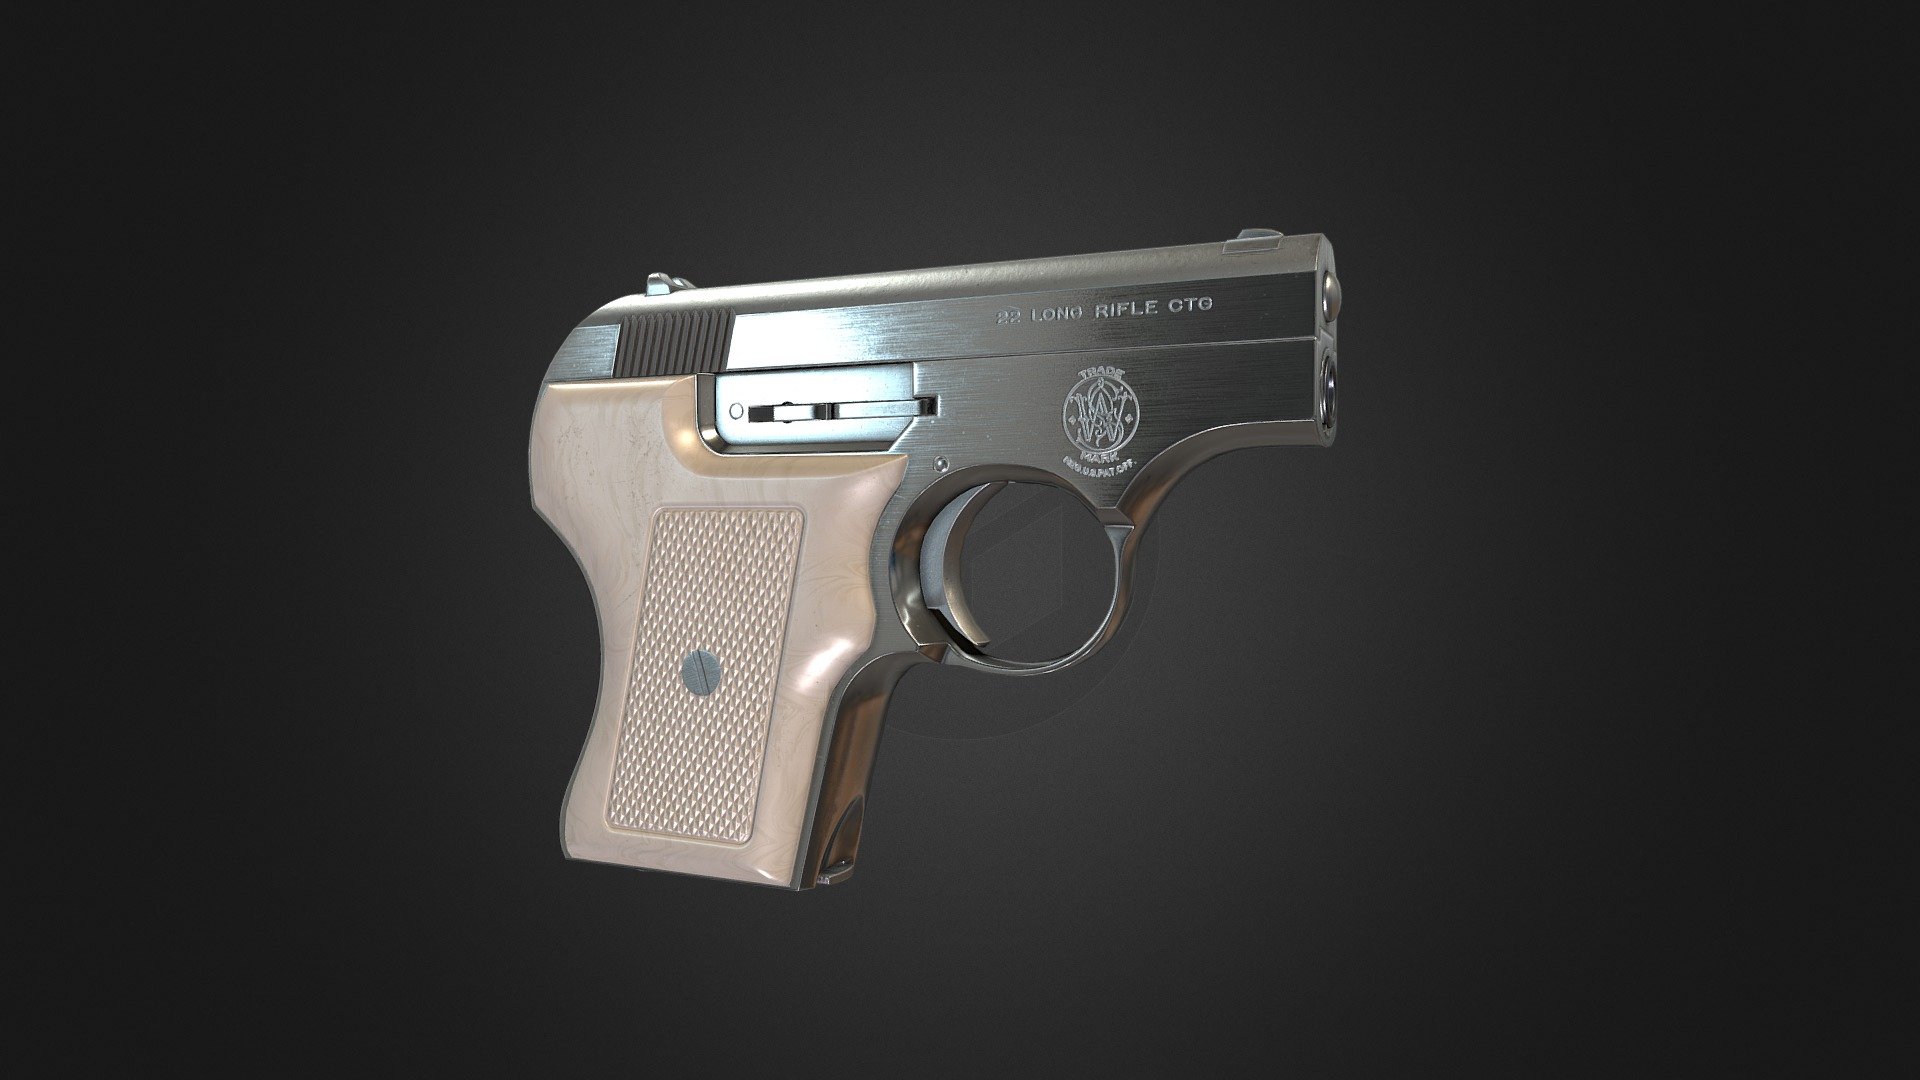 Game-ready S&amp;W Model 61, modeled in Maya and ZBrush, baked in Marmoset Toolbag, textured in Substance 3D Painter.
7,355 Tris, 4k Texture Set. 

The Smith &amp; Wesson Model 61, also called the Escort or Pocket Escort, is a self-defense pistol that was produced from 1970 to 1973. It is a five-shot (plus one in the chamber) semi-automatic recoil-operated pistol firing the .22 Long Rifle cartridge. They came in two variations, blued with faux-wood grips and nickel-plated with faux-ivory grips.
The pistol has been mainly forgotten except for its inclusion in the 1976 film &ldquo;Taxi Driver